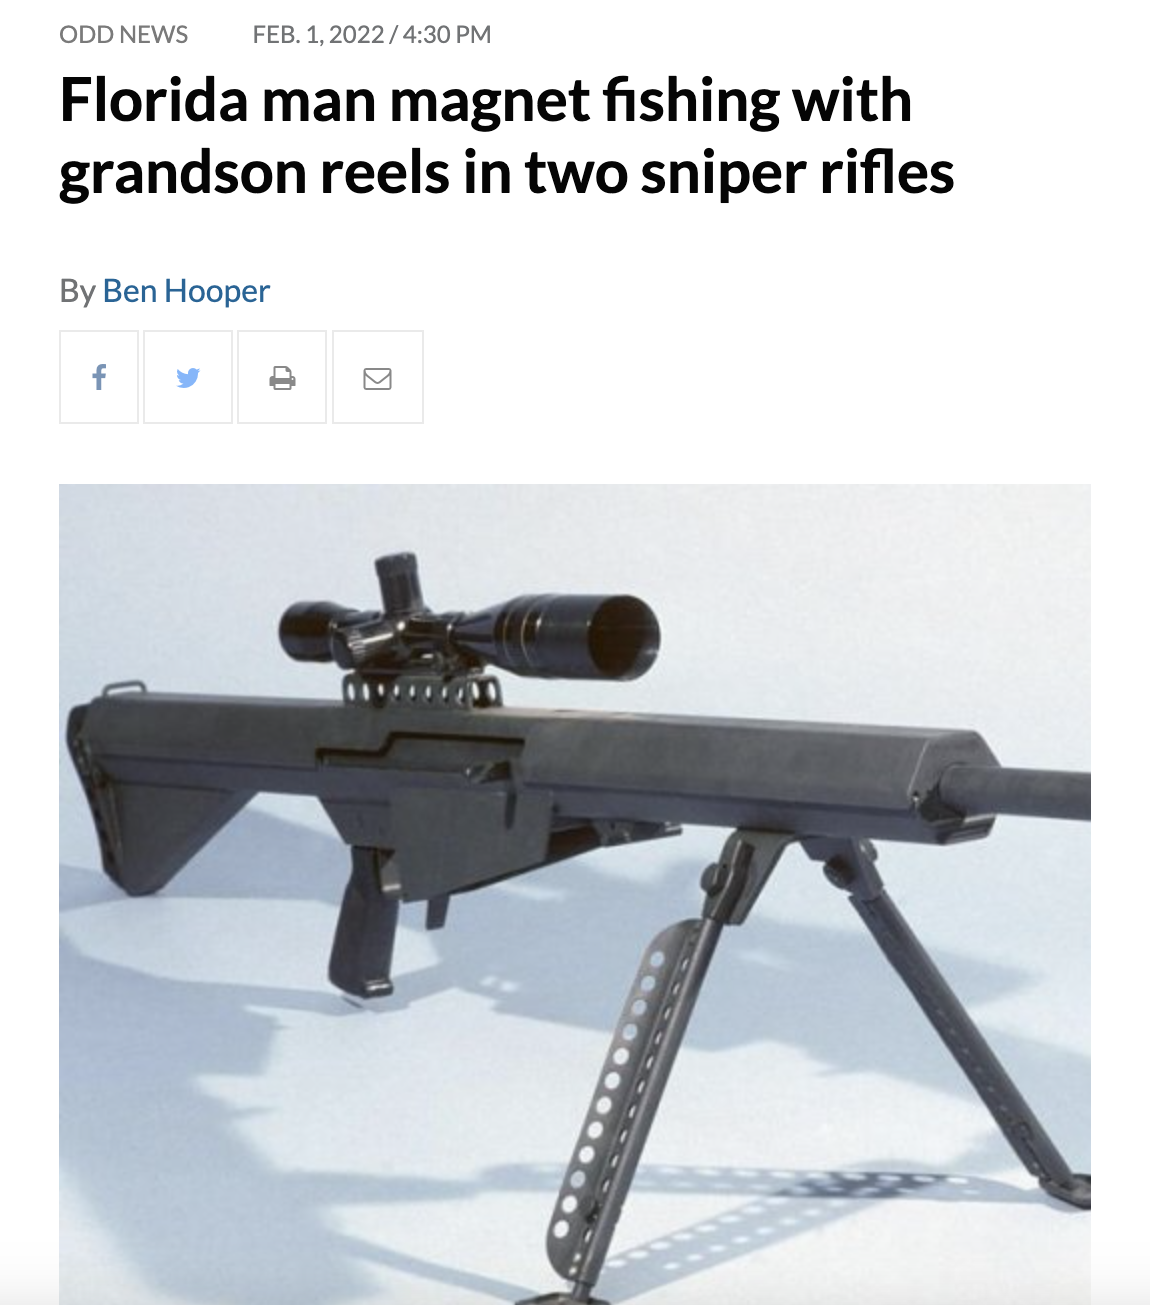 Best of Florida Man 2022 - Odd News Feb. 1, 2022 Florida man magnet fishing with grandson reels in two sniper rifles By Ben Hooper f D